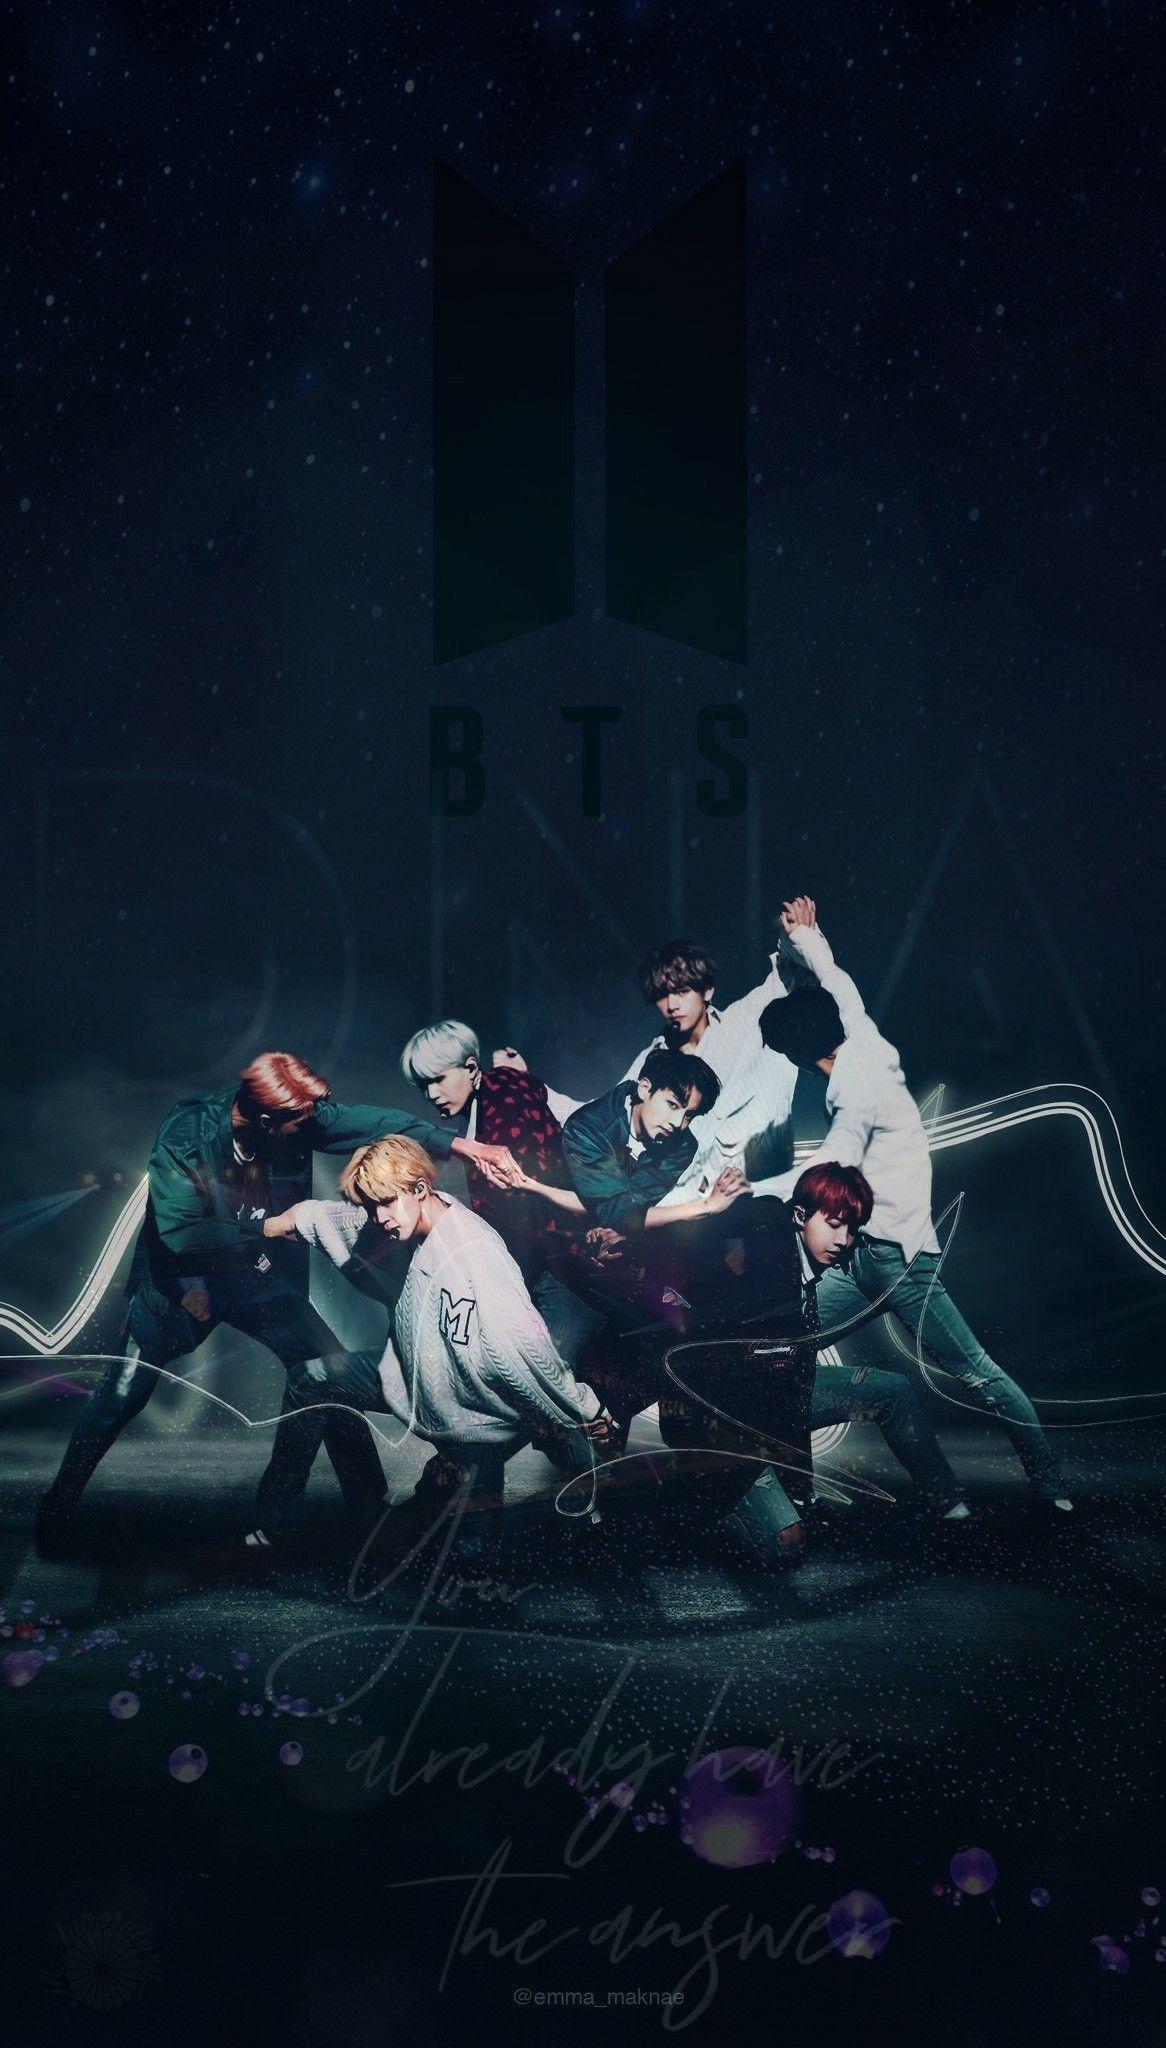 74+ Hd Wallpapers Of Bts Army Pics - MyWeb